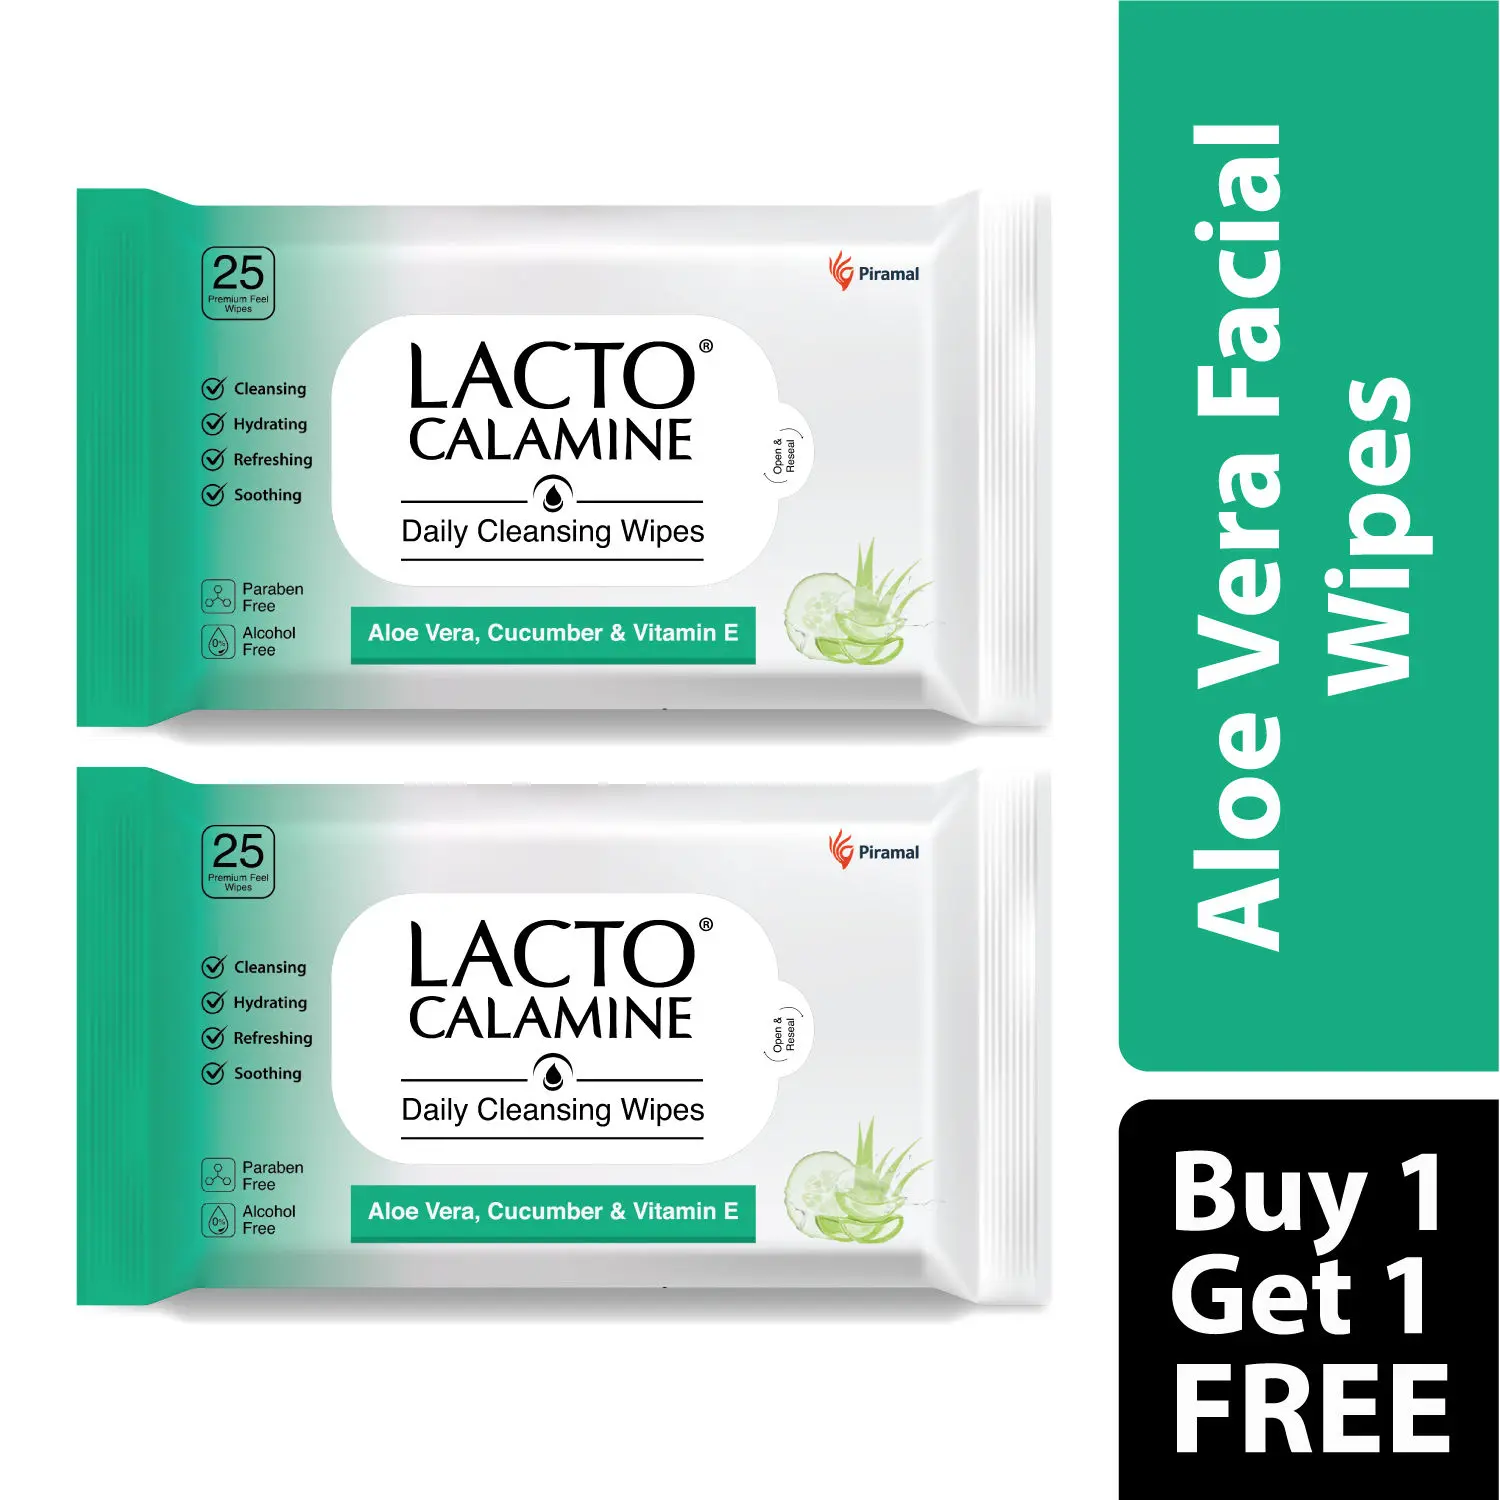 Lacto Calamine Daily Cleansing Wipes (25 wipes)